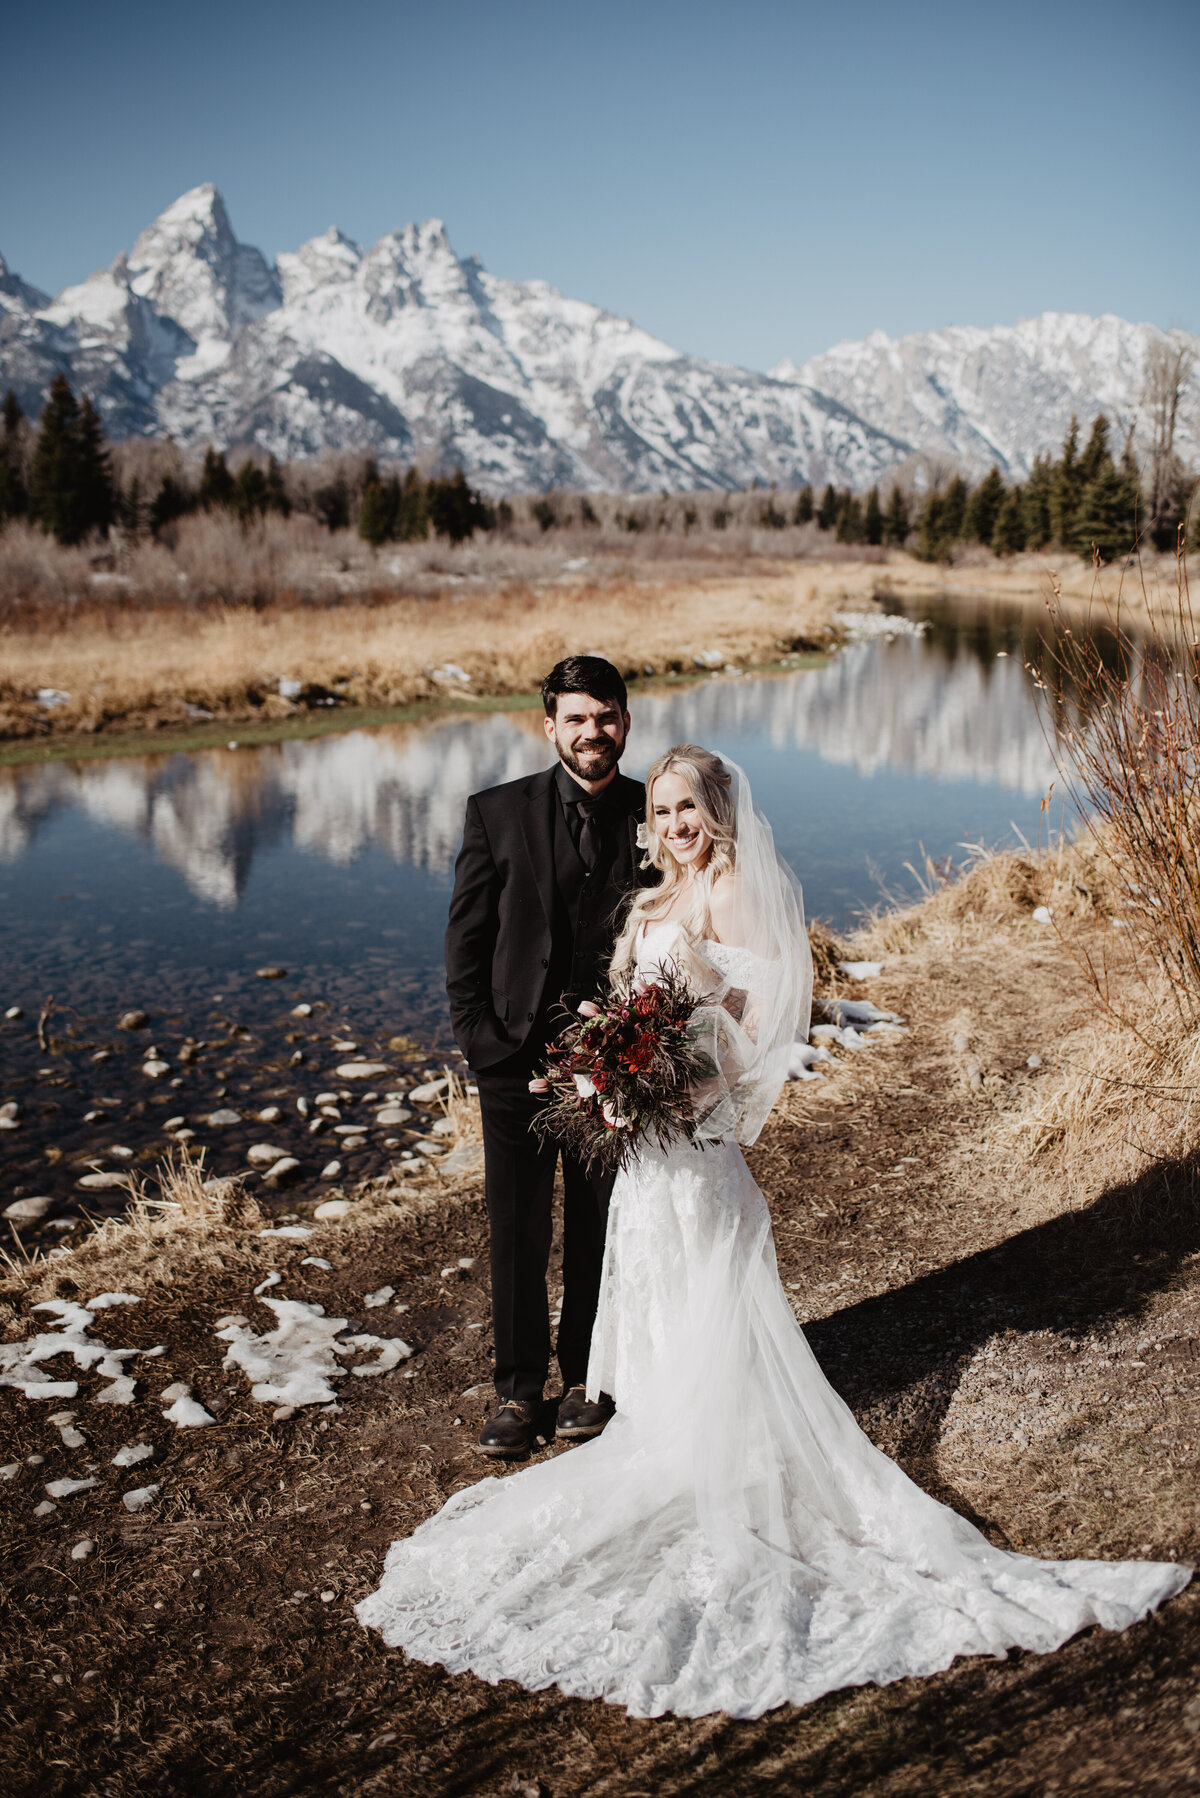 Jackson Hole Photographers capture bride and groom portraits in front of Tetons